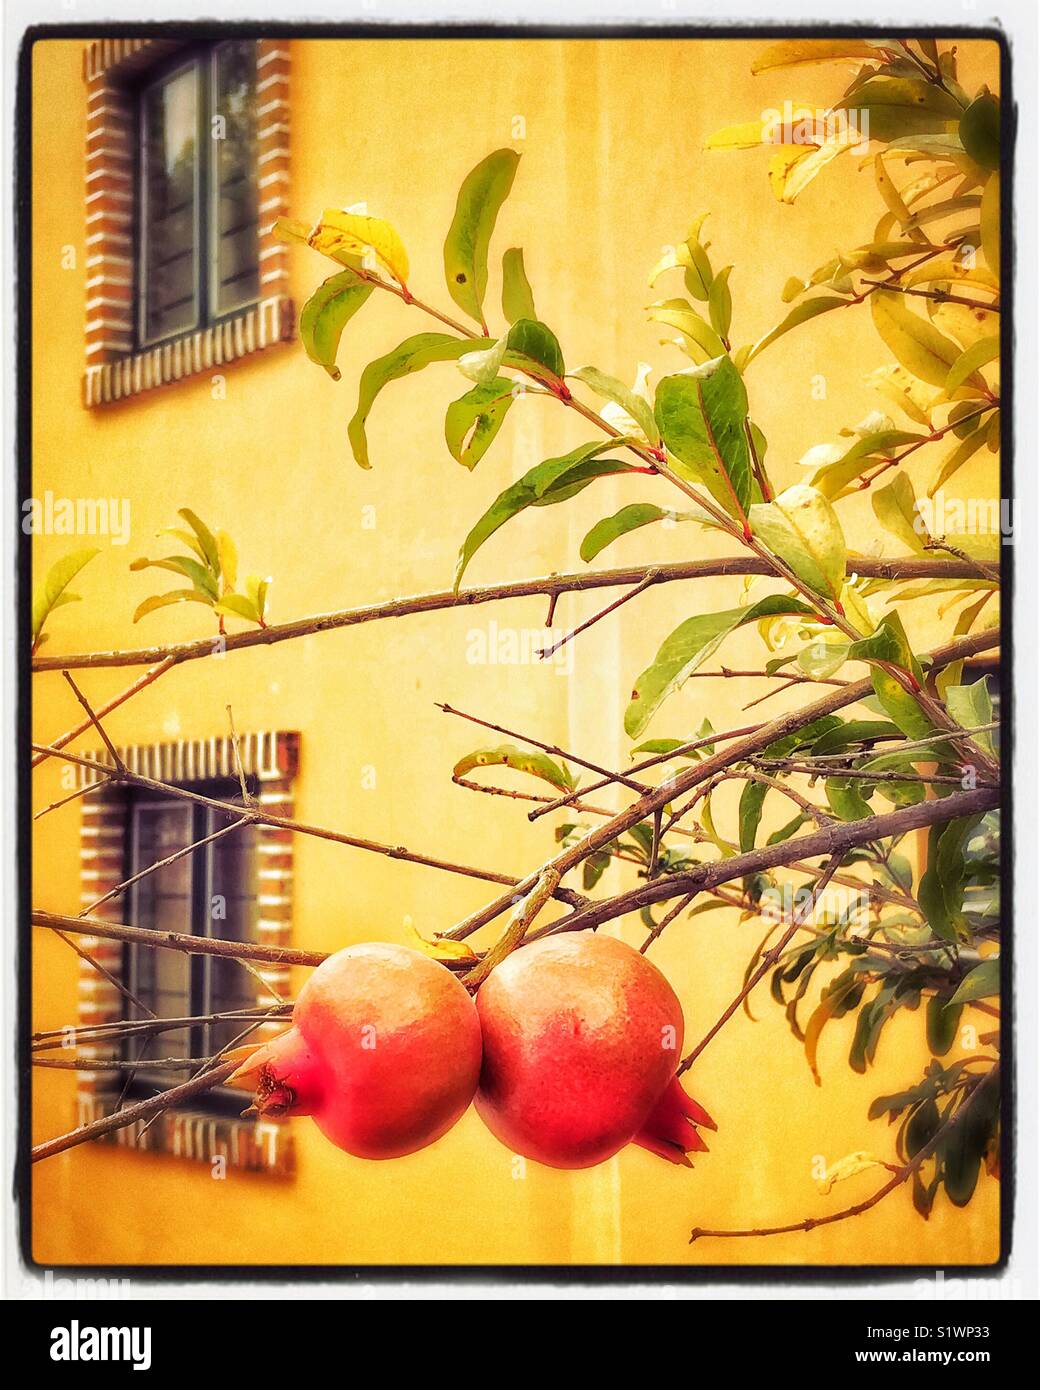 Pomegranates grow on a tree in front of a yellow house in Ajijic, Mexico. Stock Photo